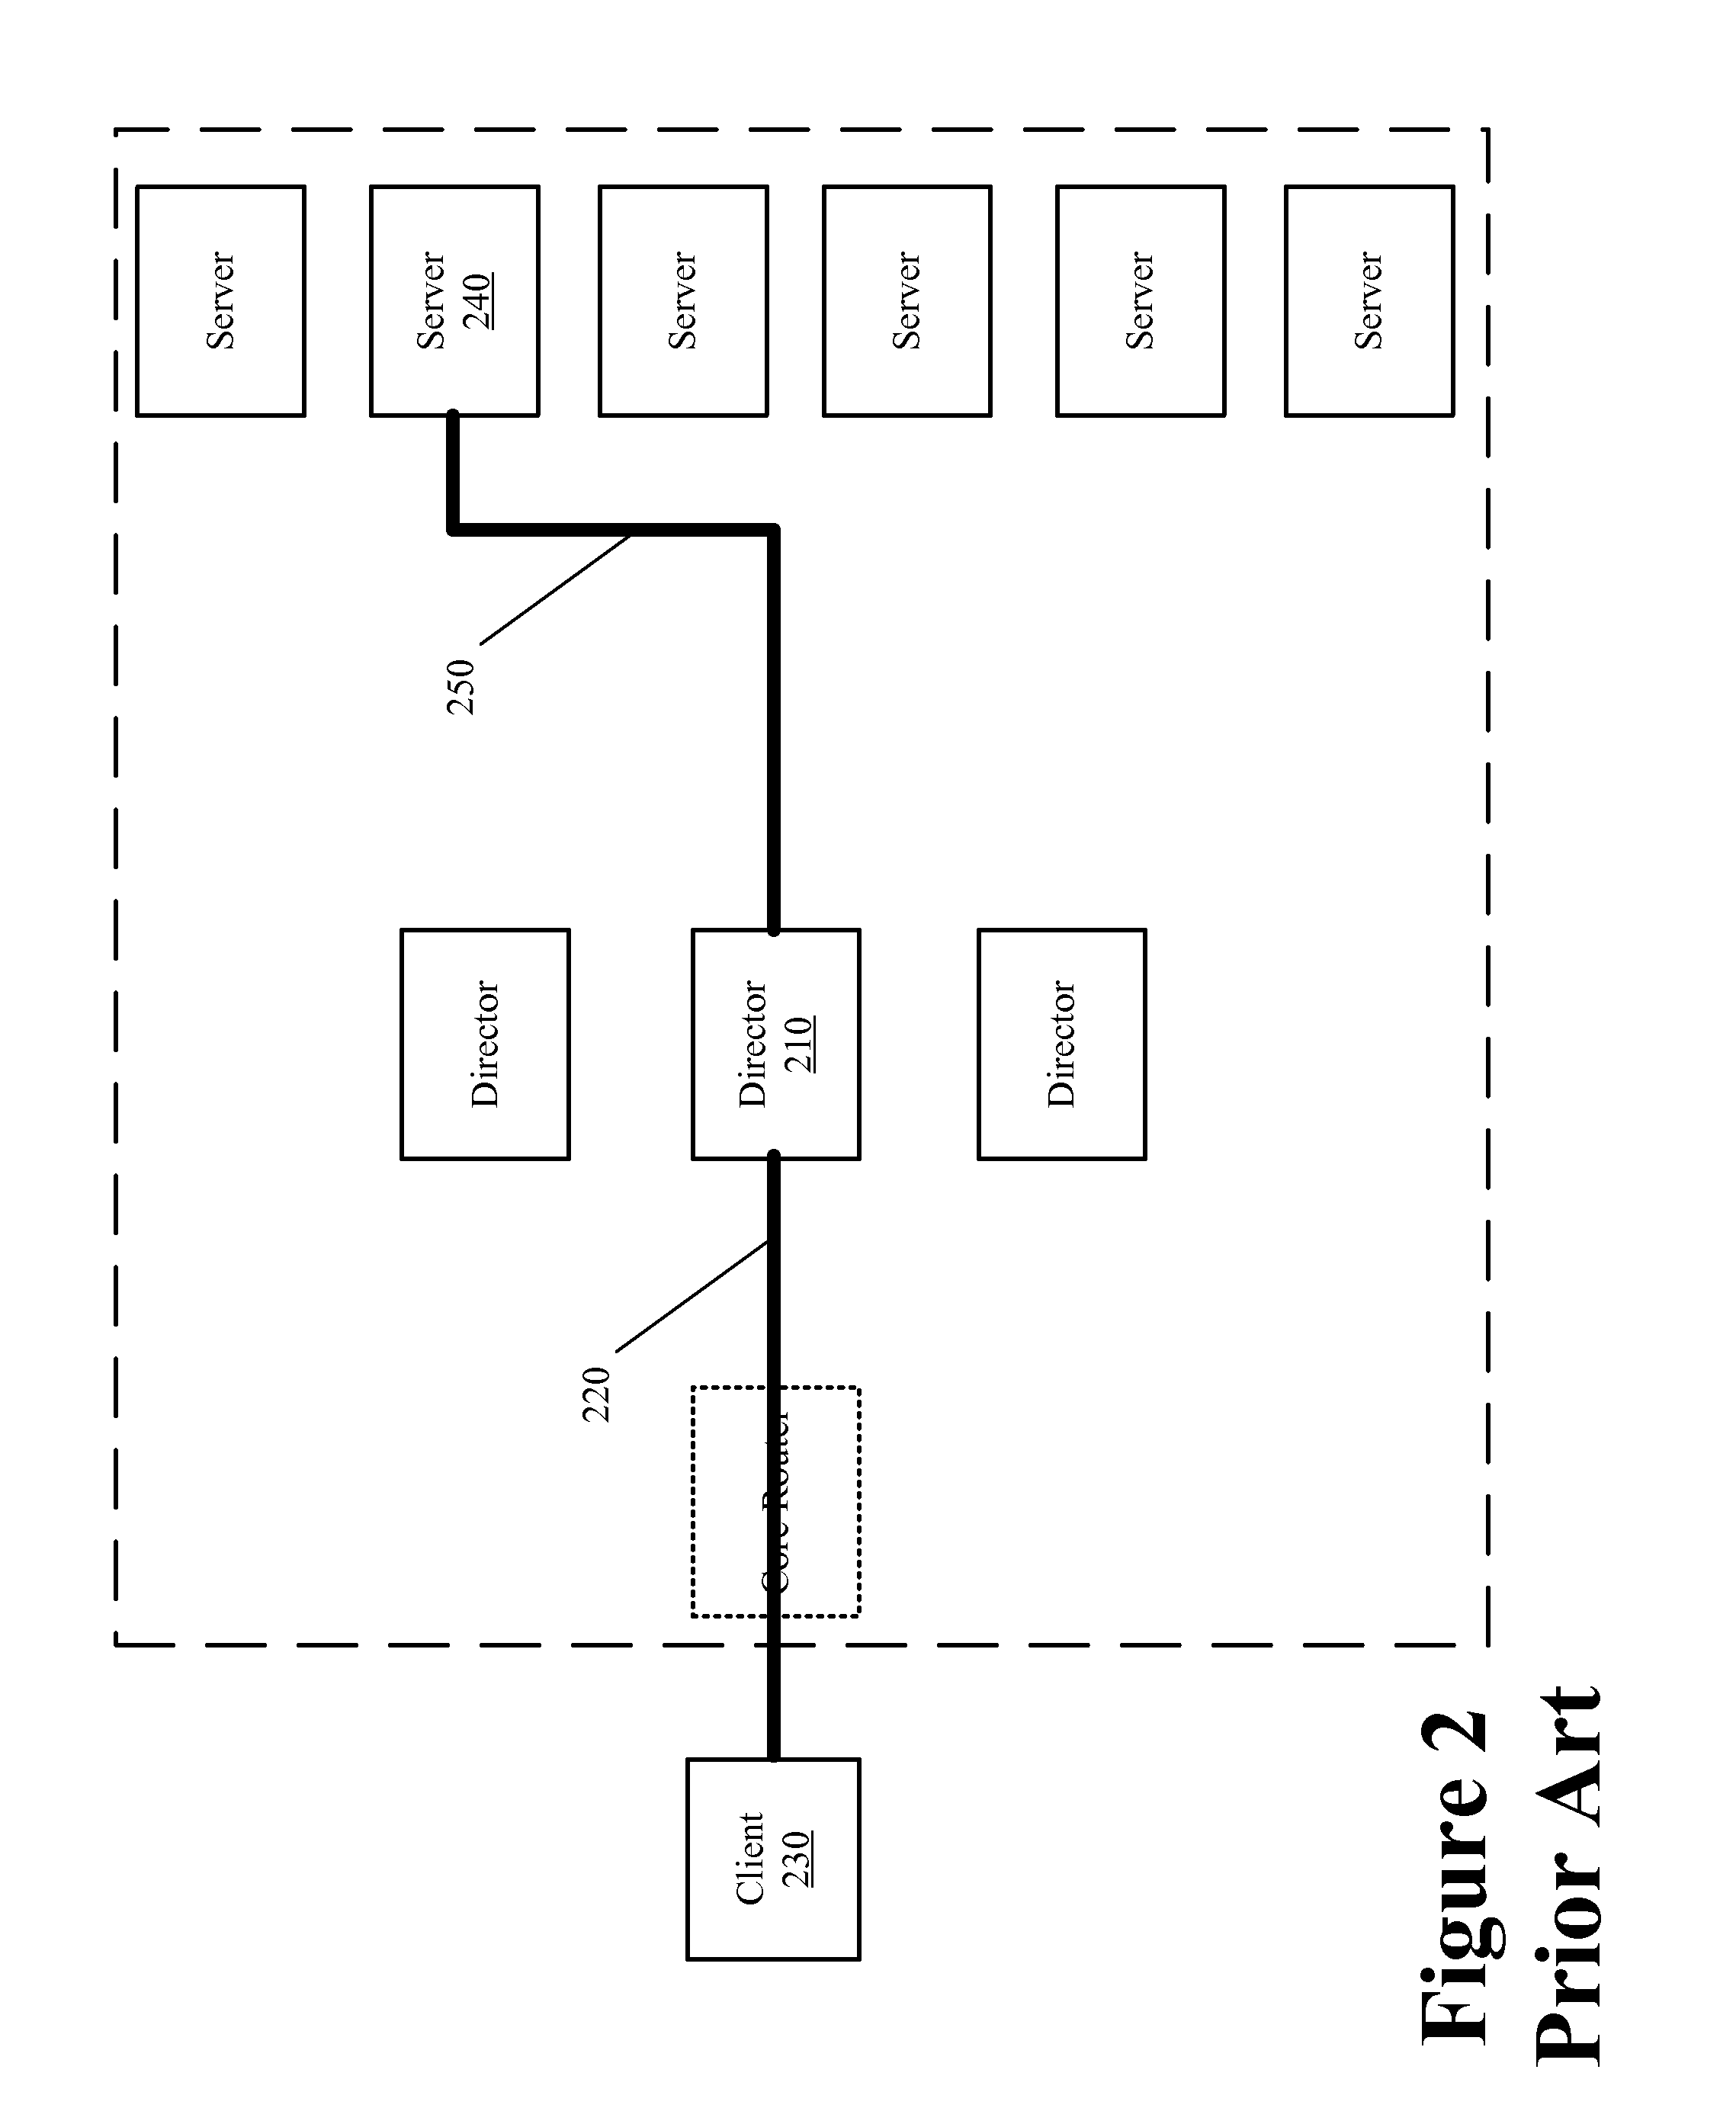 Network Connection Hand-off Using State Transformations